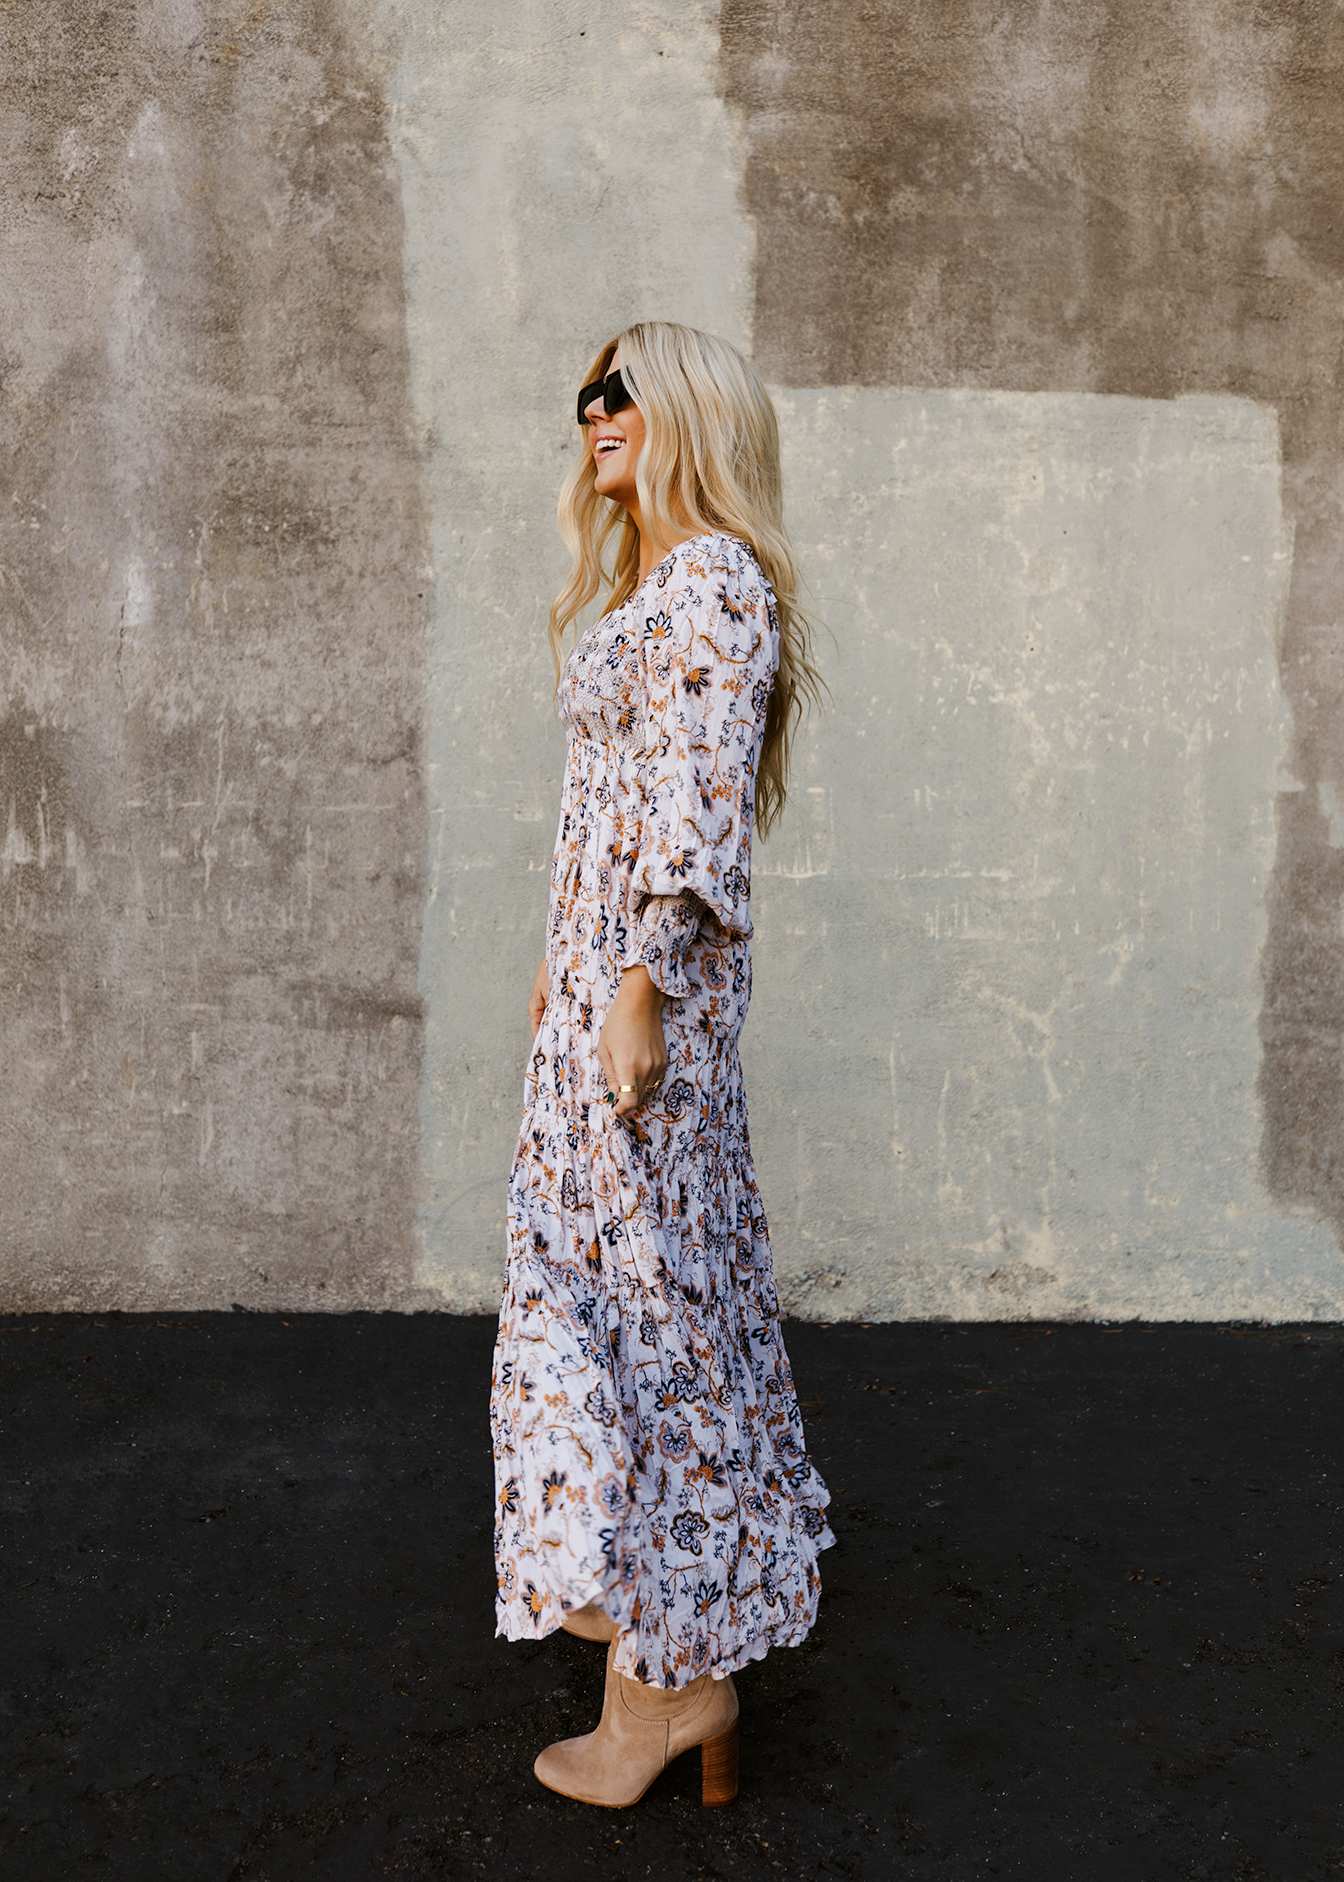 Winter Dresses and Boots from Free People